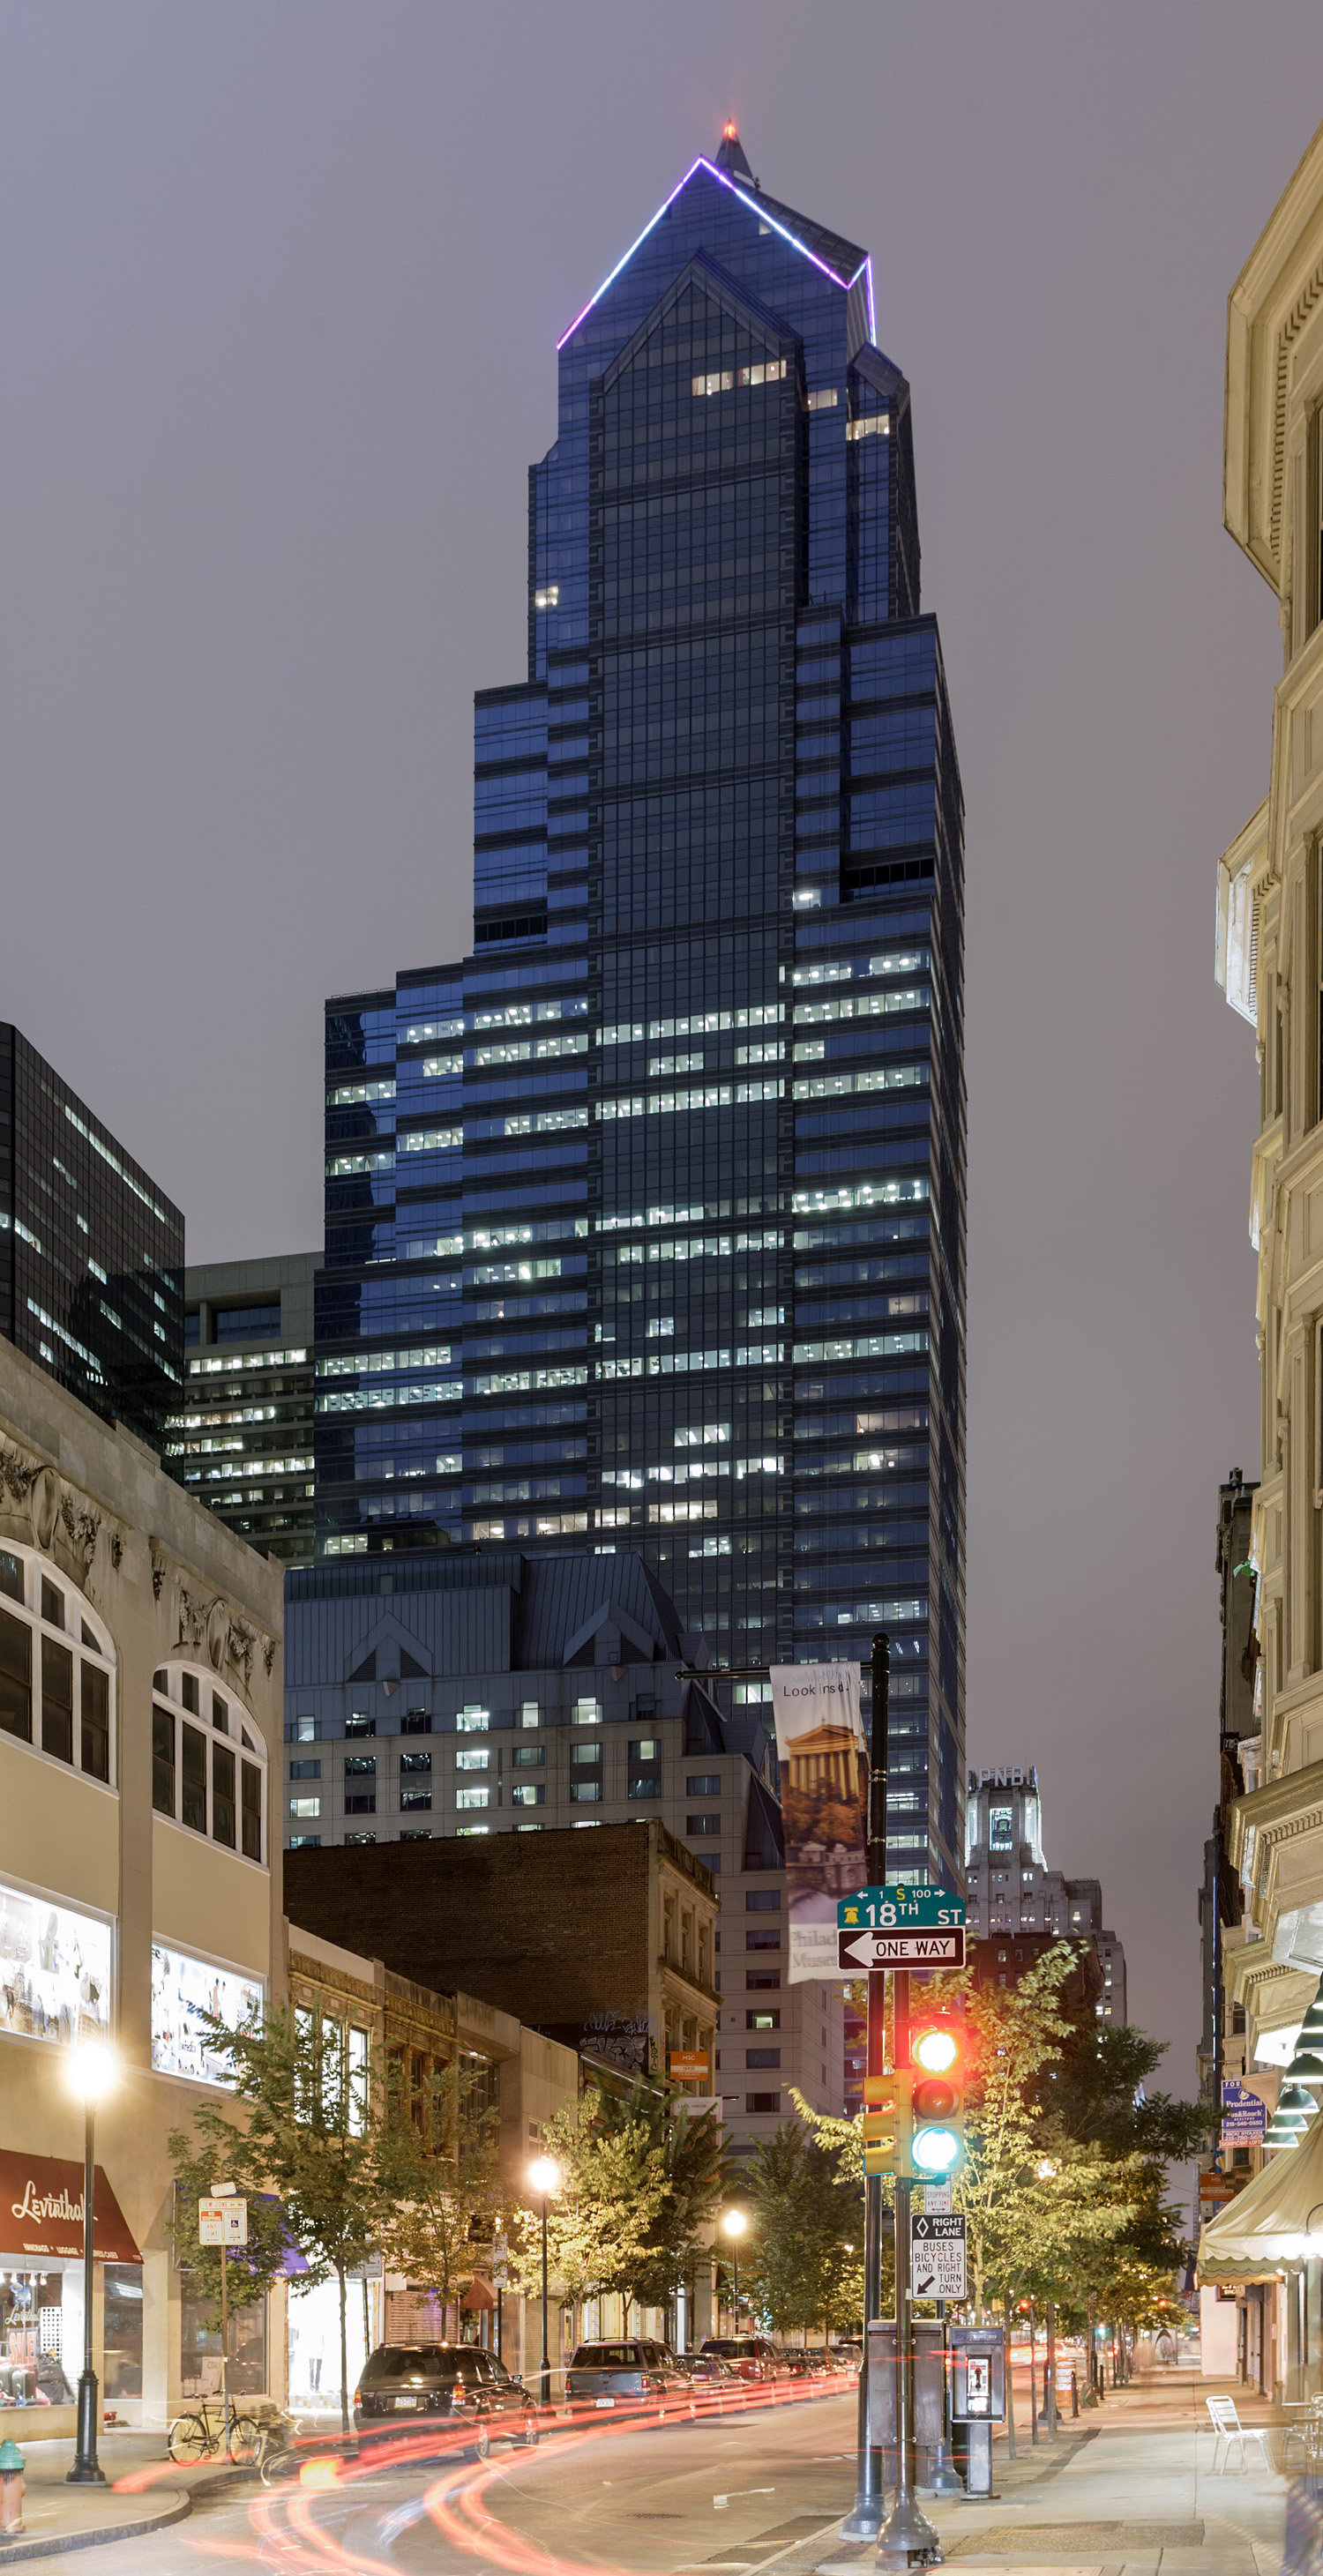 Two Liberty Place, Philadelphia - View from the south. © Mathias Beinling